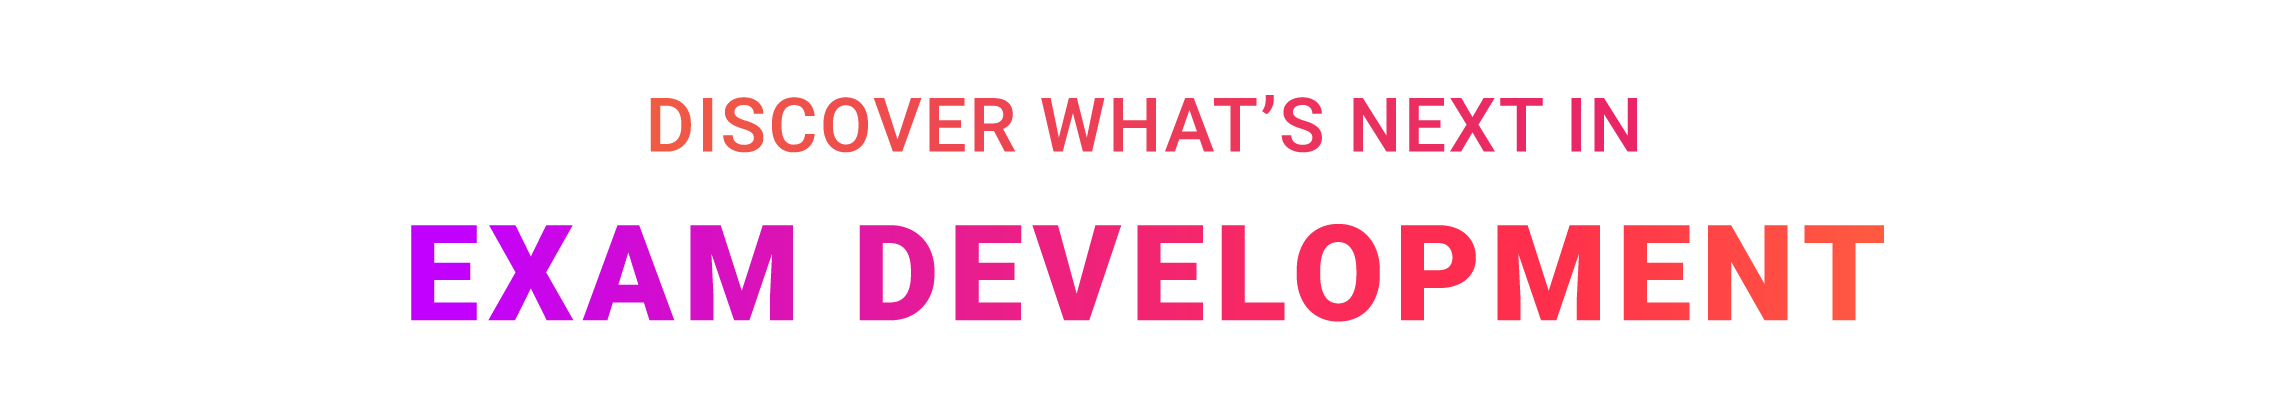 Discover-whats-next-in-exam-development